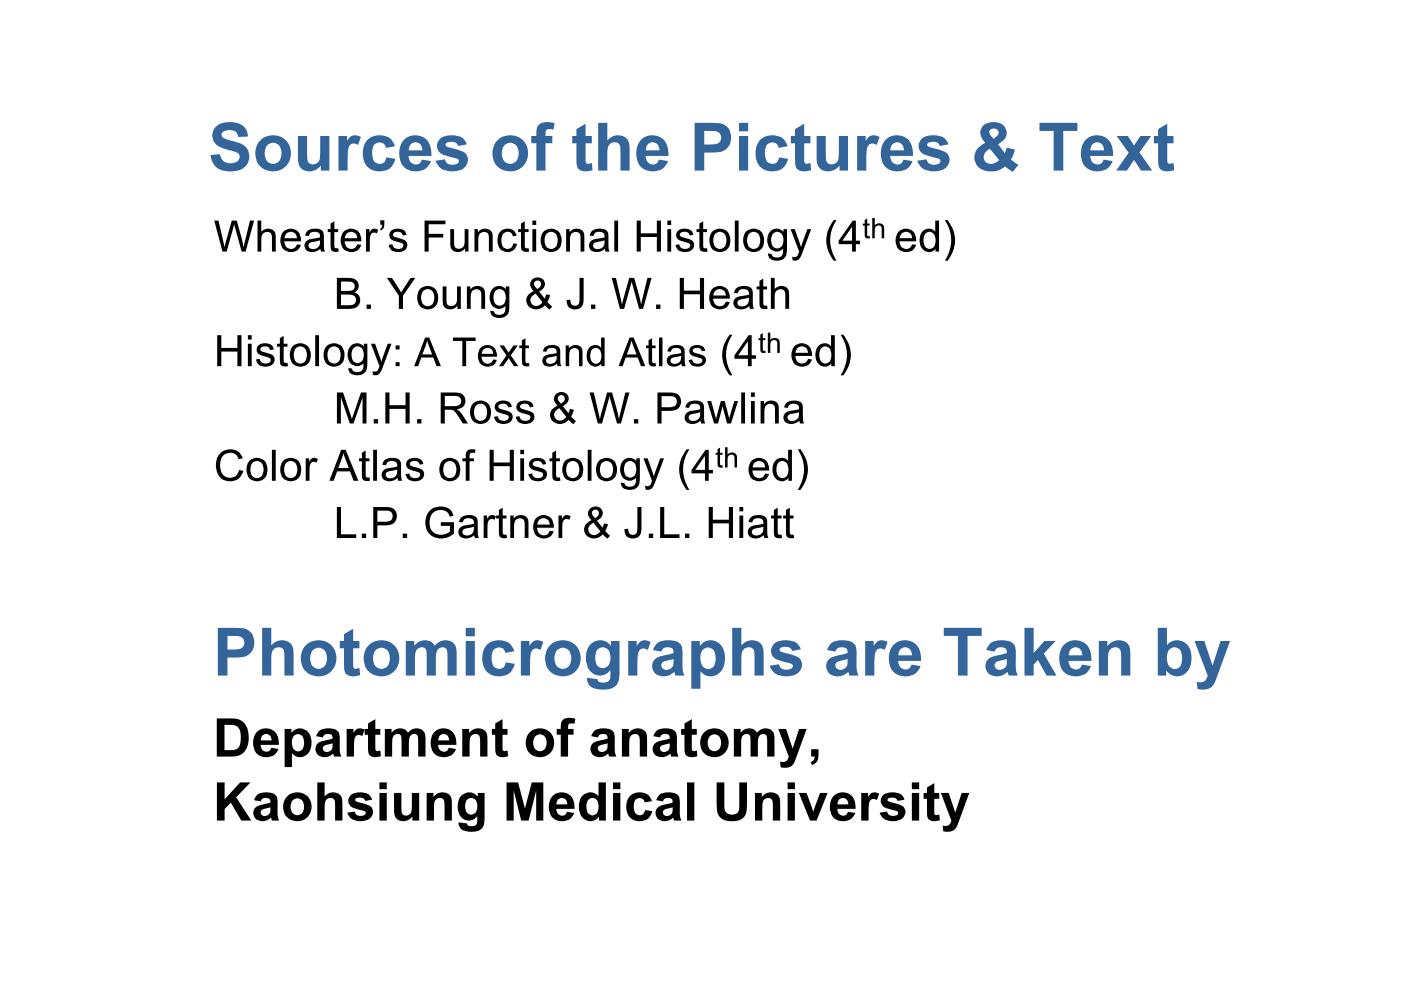 block6-1_02.jpg - Sources of the Pictures & TextWheater's Functional Histology (4th ed)      B. Young & J. W. HeathHistology: A Text and Atlas (4th ed)      M.H. Ross & W. PawlinaColor Atlas of Histology (4th ed)      L.P. Gartner & J.L. HiattPhotomicrographs are Taken byDepartment of anatomy,Kaohsiung Medical University